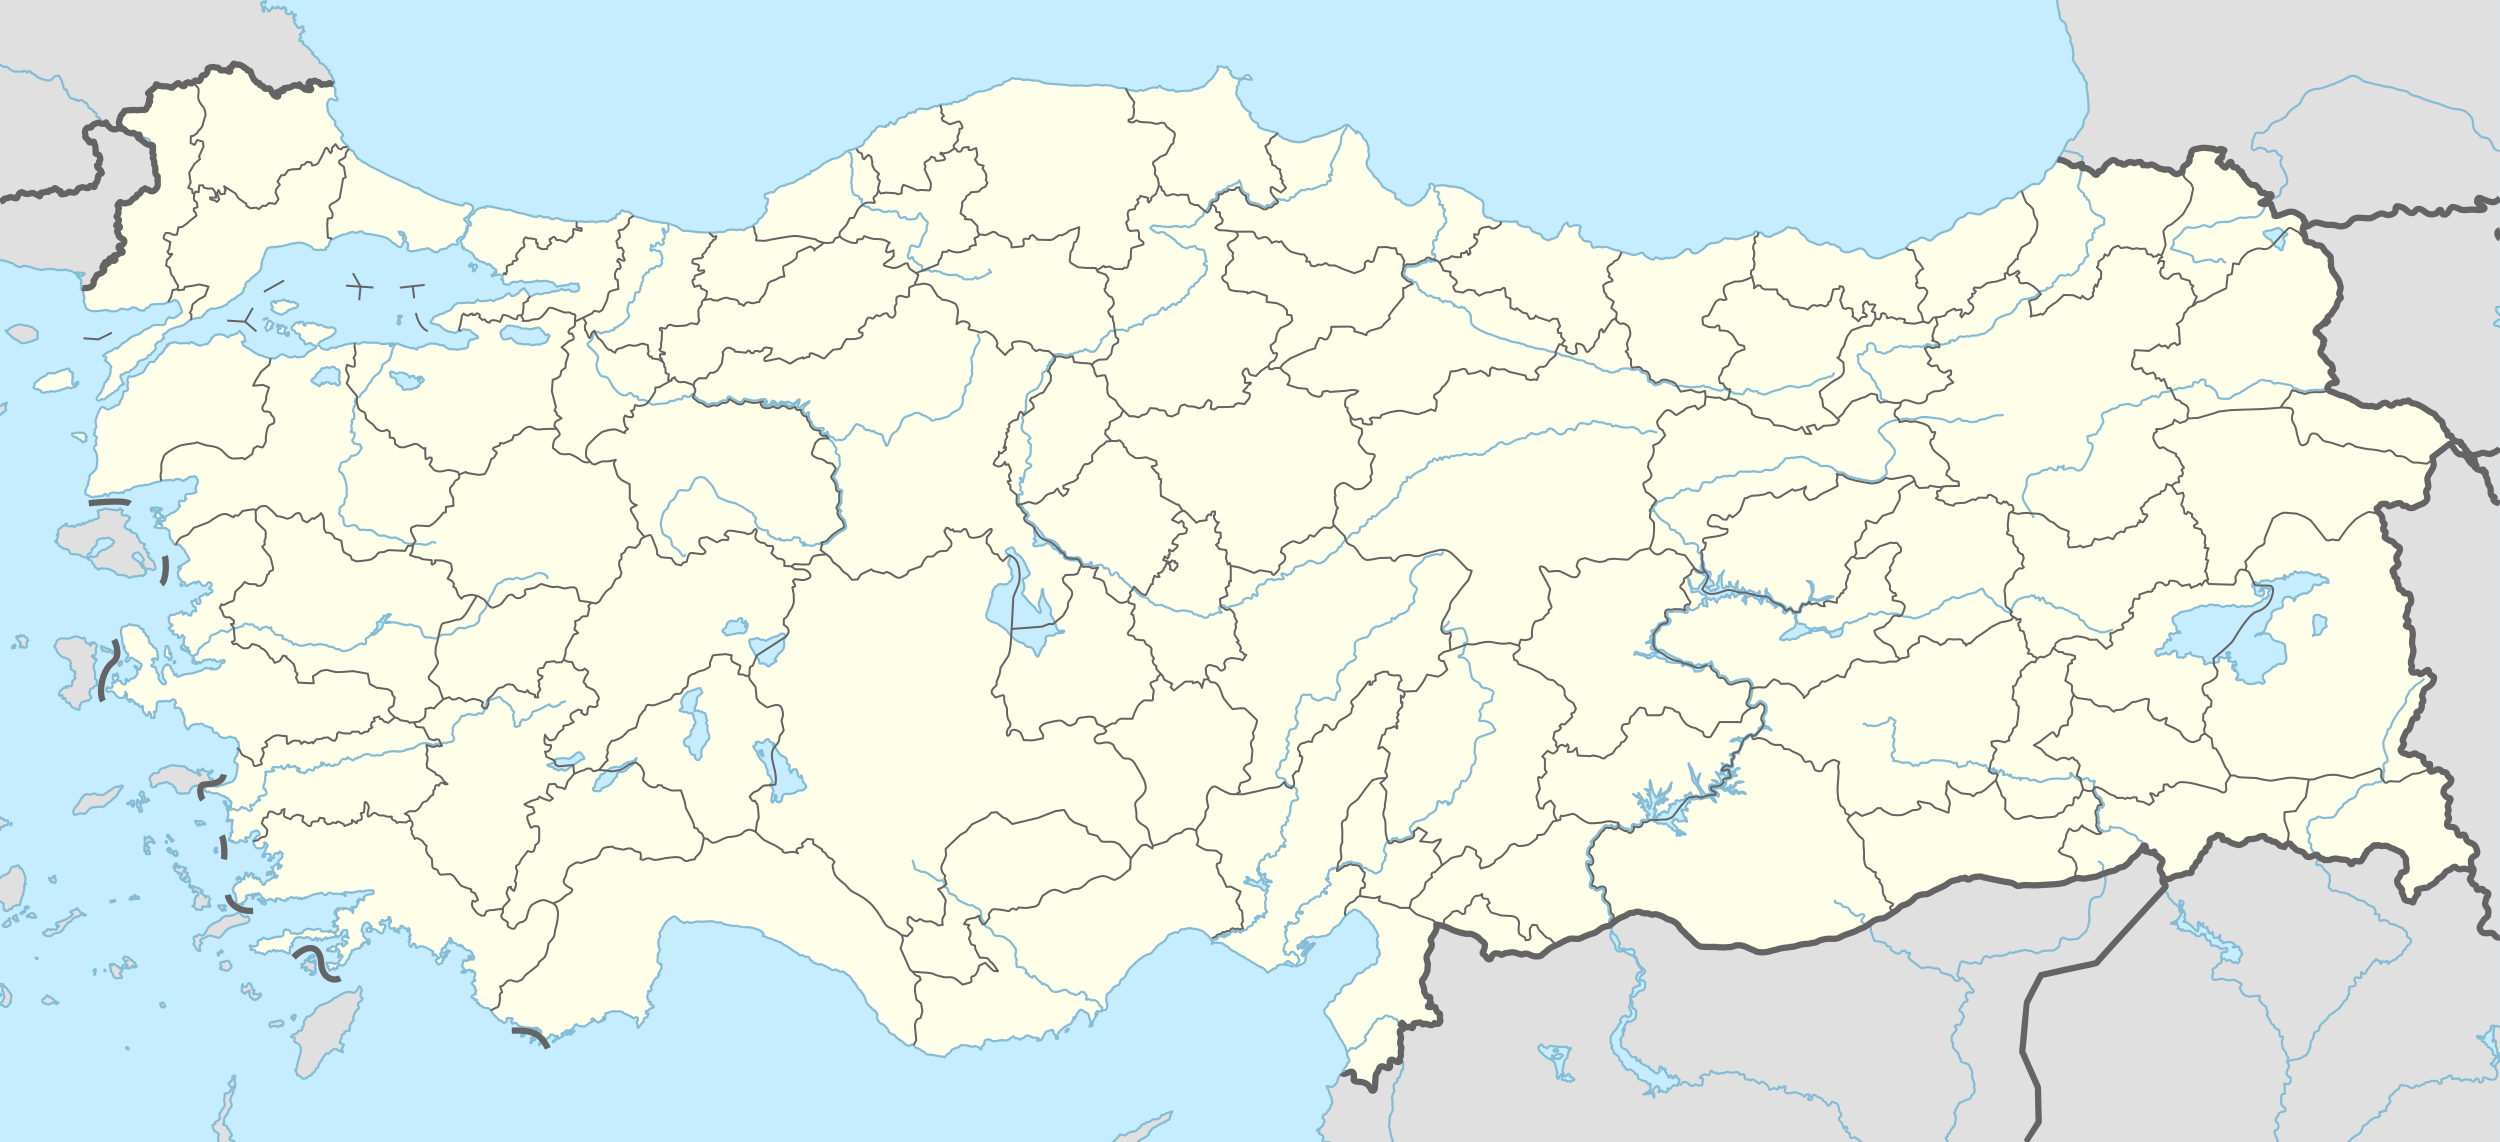 Turkish insurgency detailed map is located in Turkey